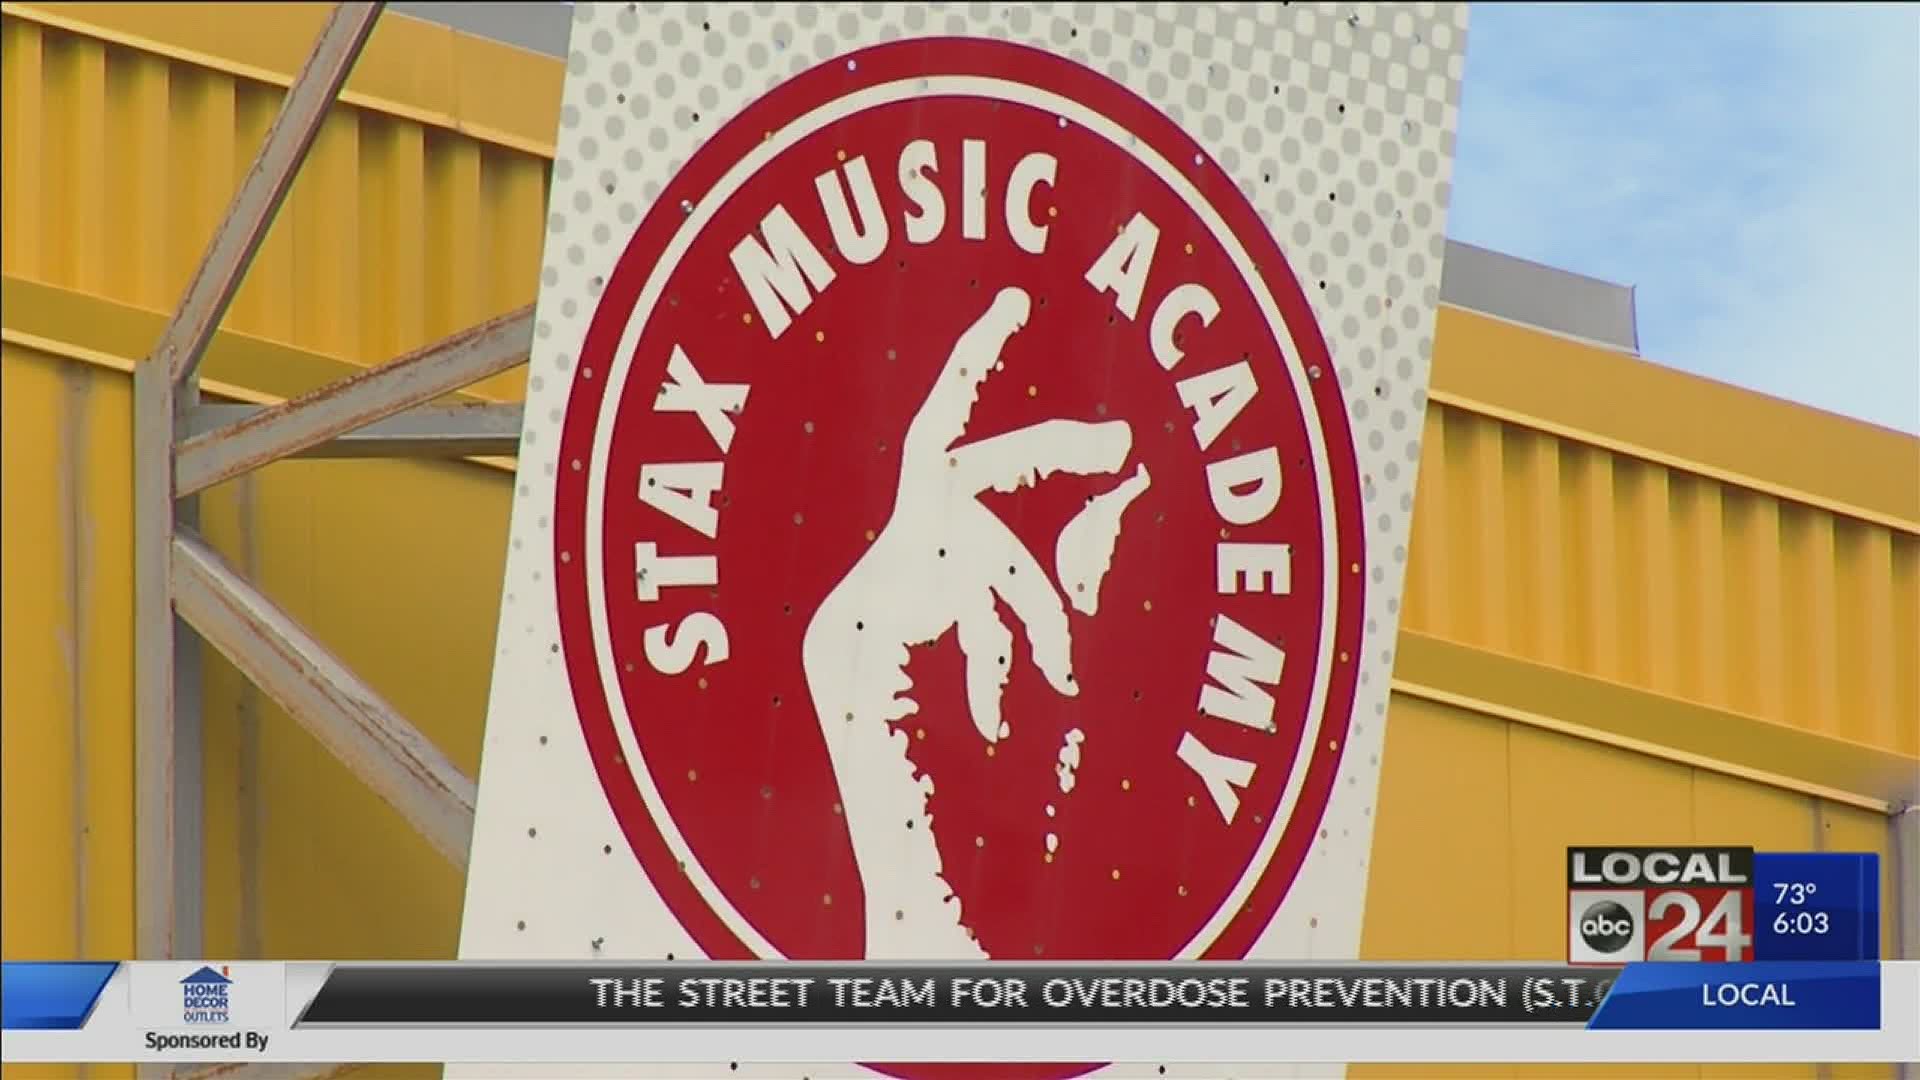 The Stax Music Academy is encouraging young adults struggling with the events surrounding the murder of George Floyd to channel their emotions through music.